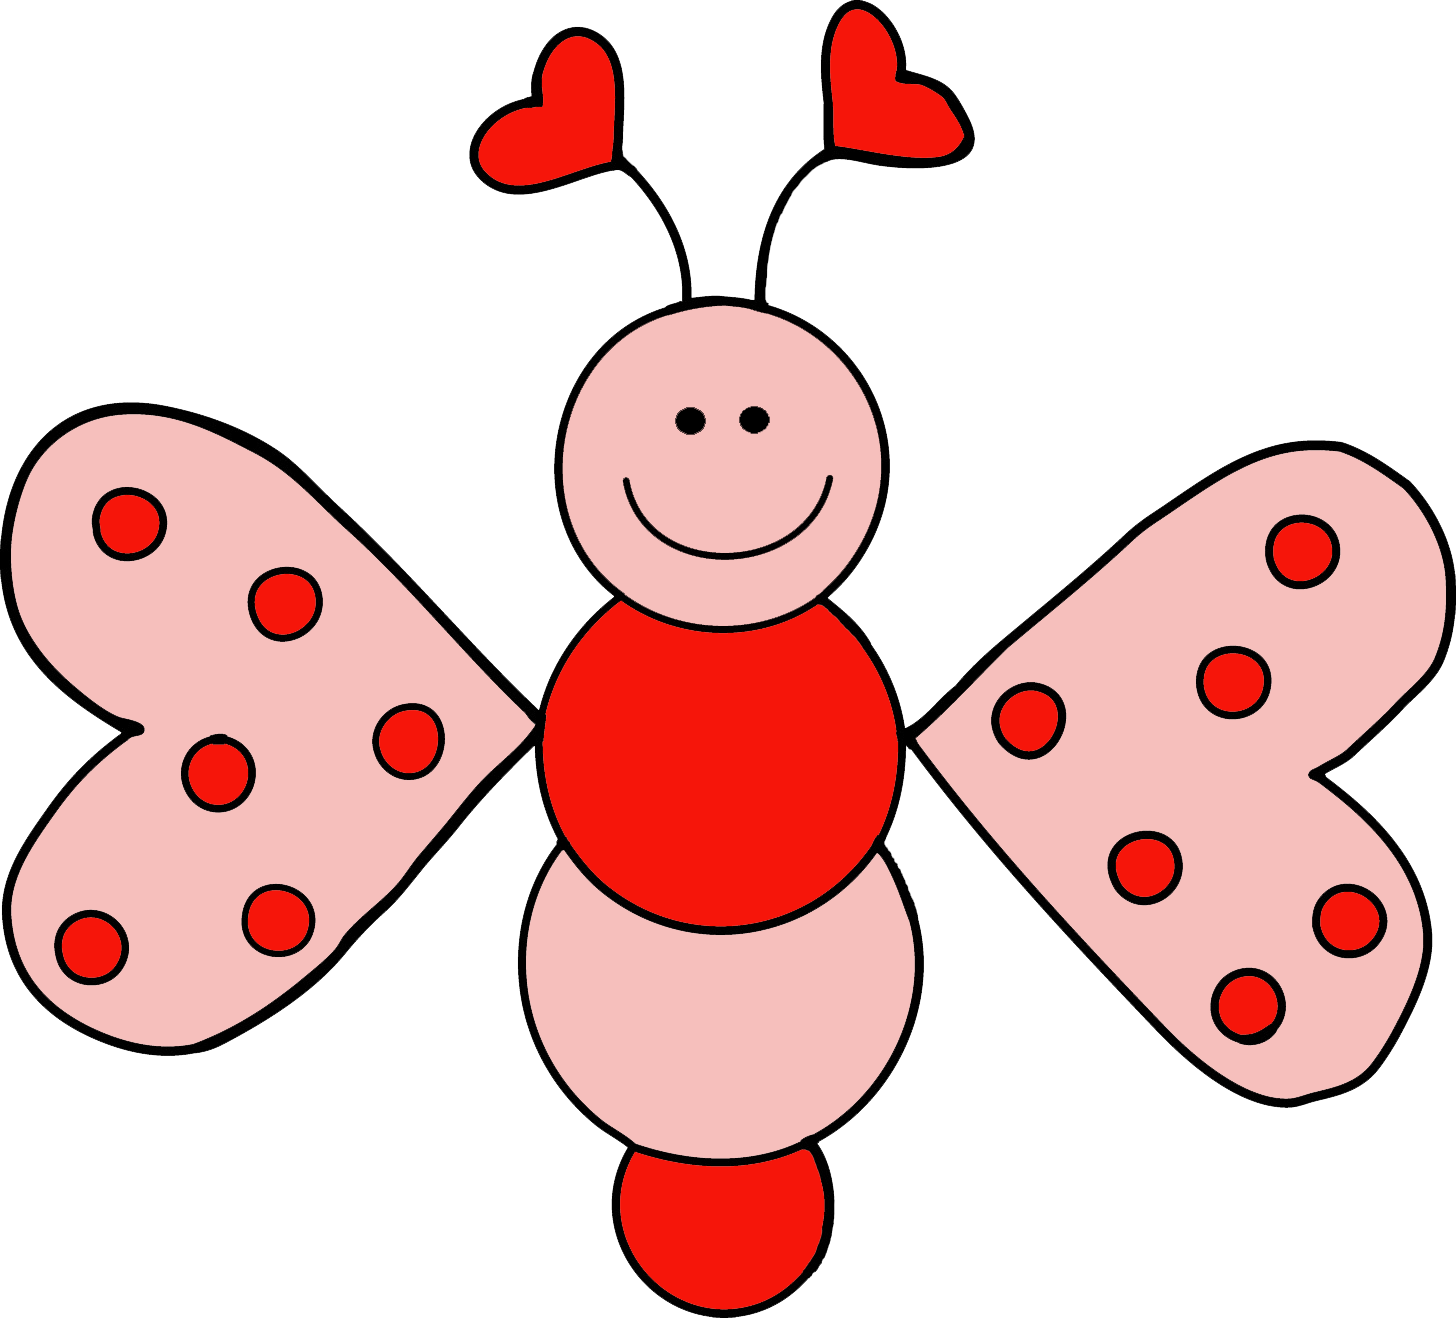 Pictures Of Cartoon Bugs - ClipArt Best